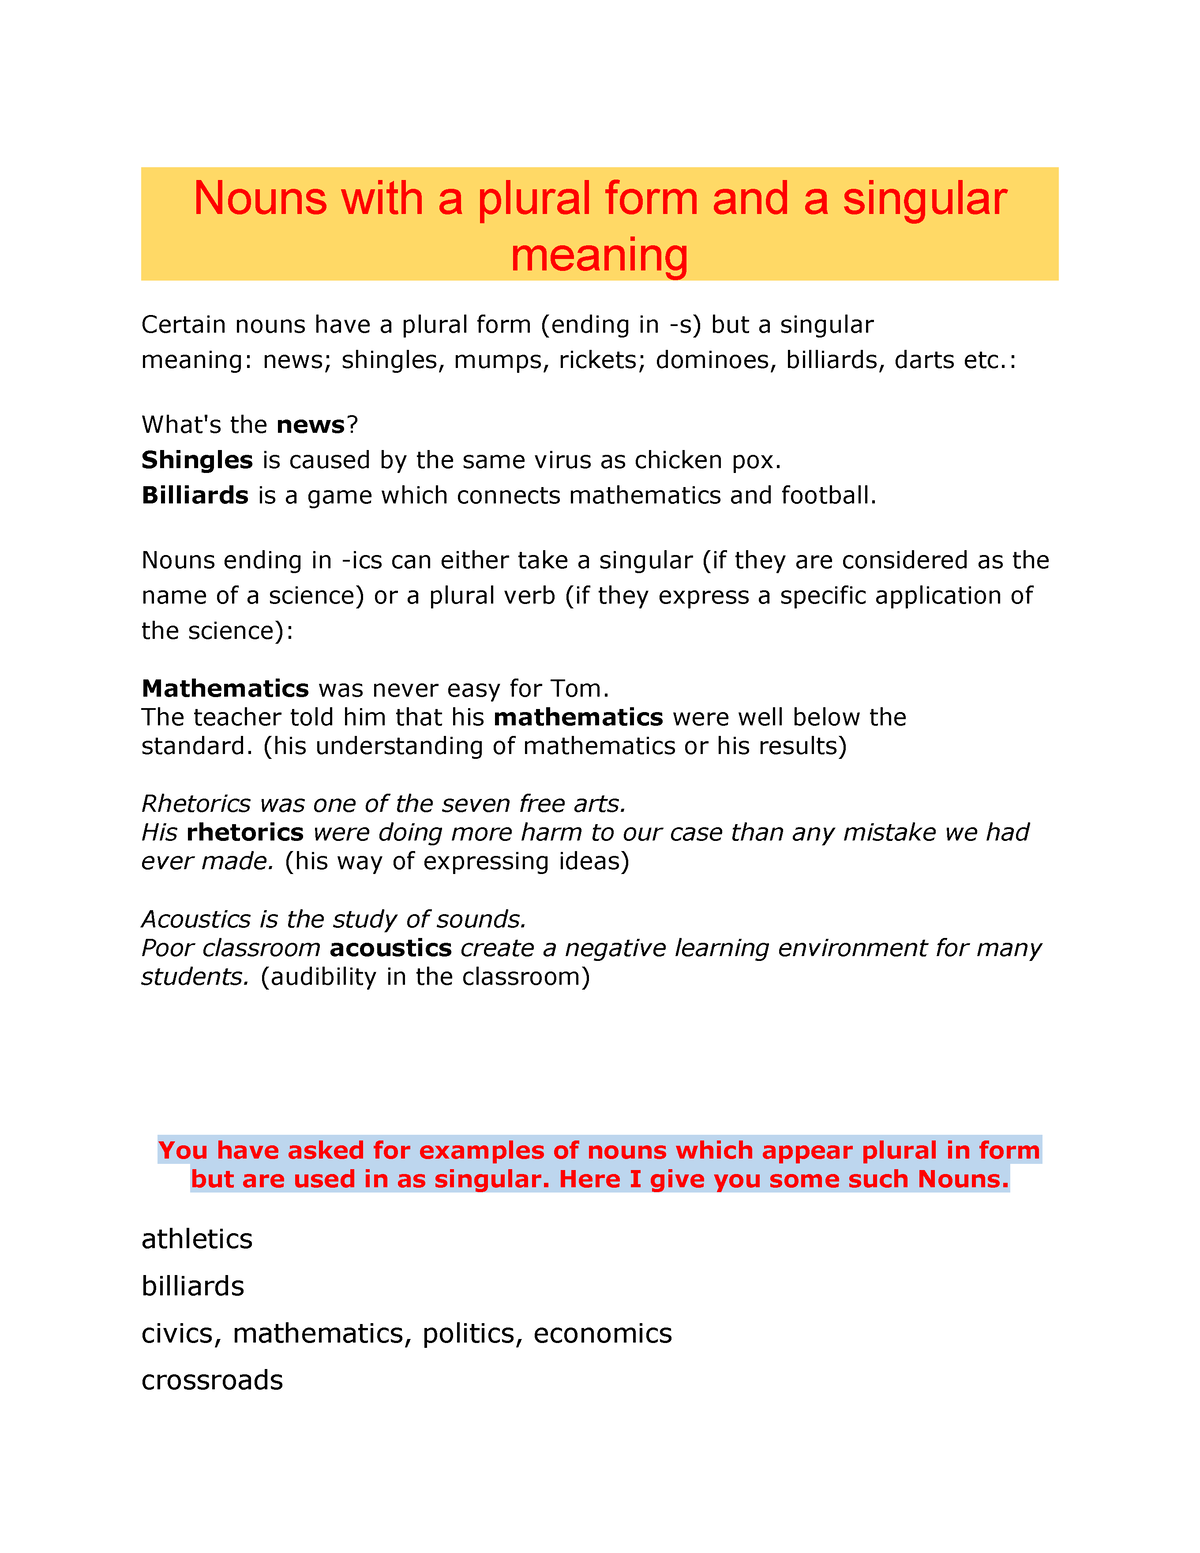 4-nouns-with-a-plural-form-and-a-singular-meaning-nouns-with-a-plural-form-and-a-singular